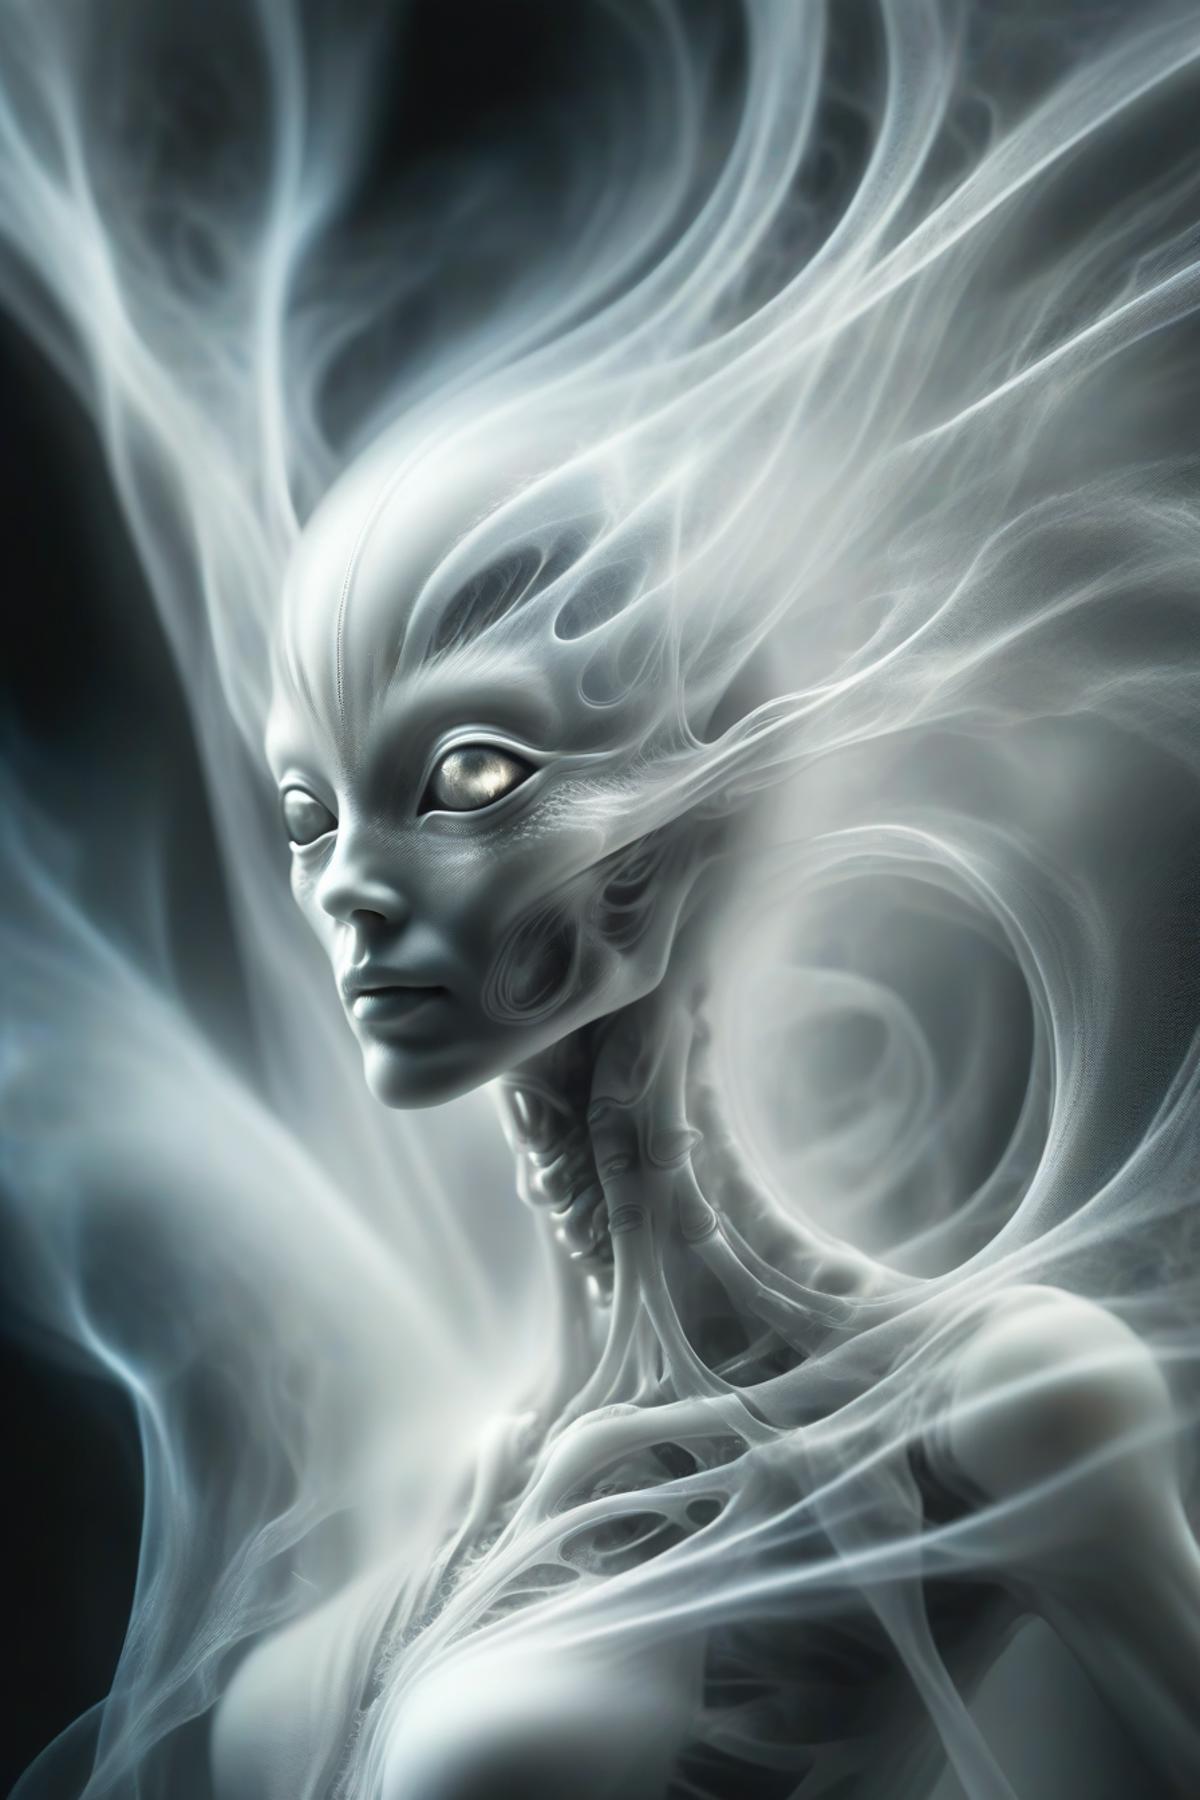 A woman with a flowing white mane, with a face that appears to be a mix of human and robotic features, surrounded by a white, wispy substance.